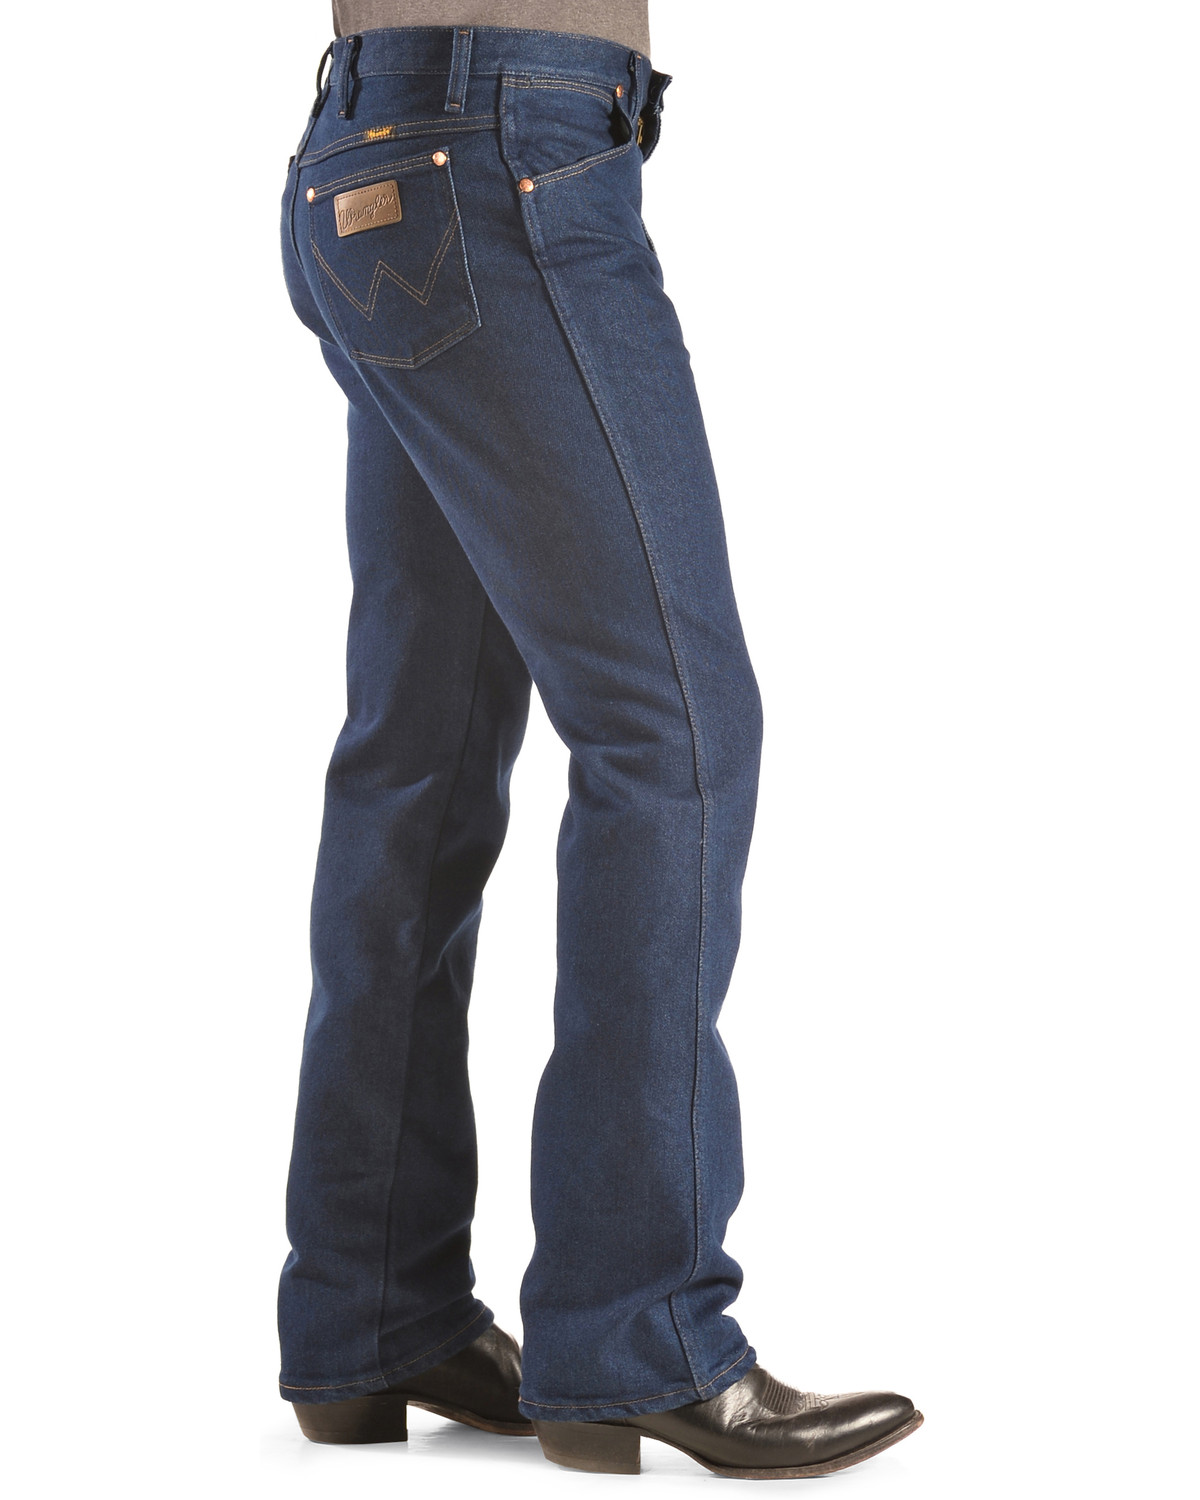 Wrangler Jeans - 938 Slim Fit Stretch - Country Outfitter